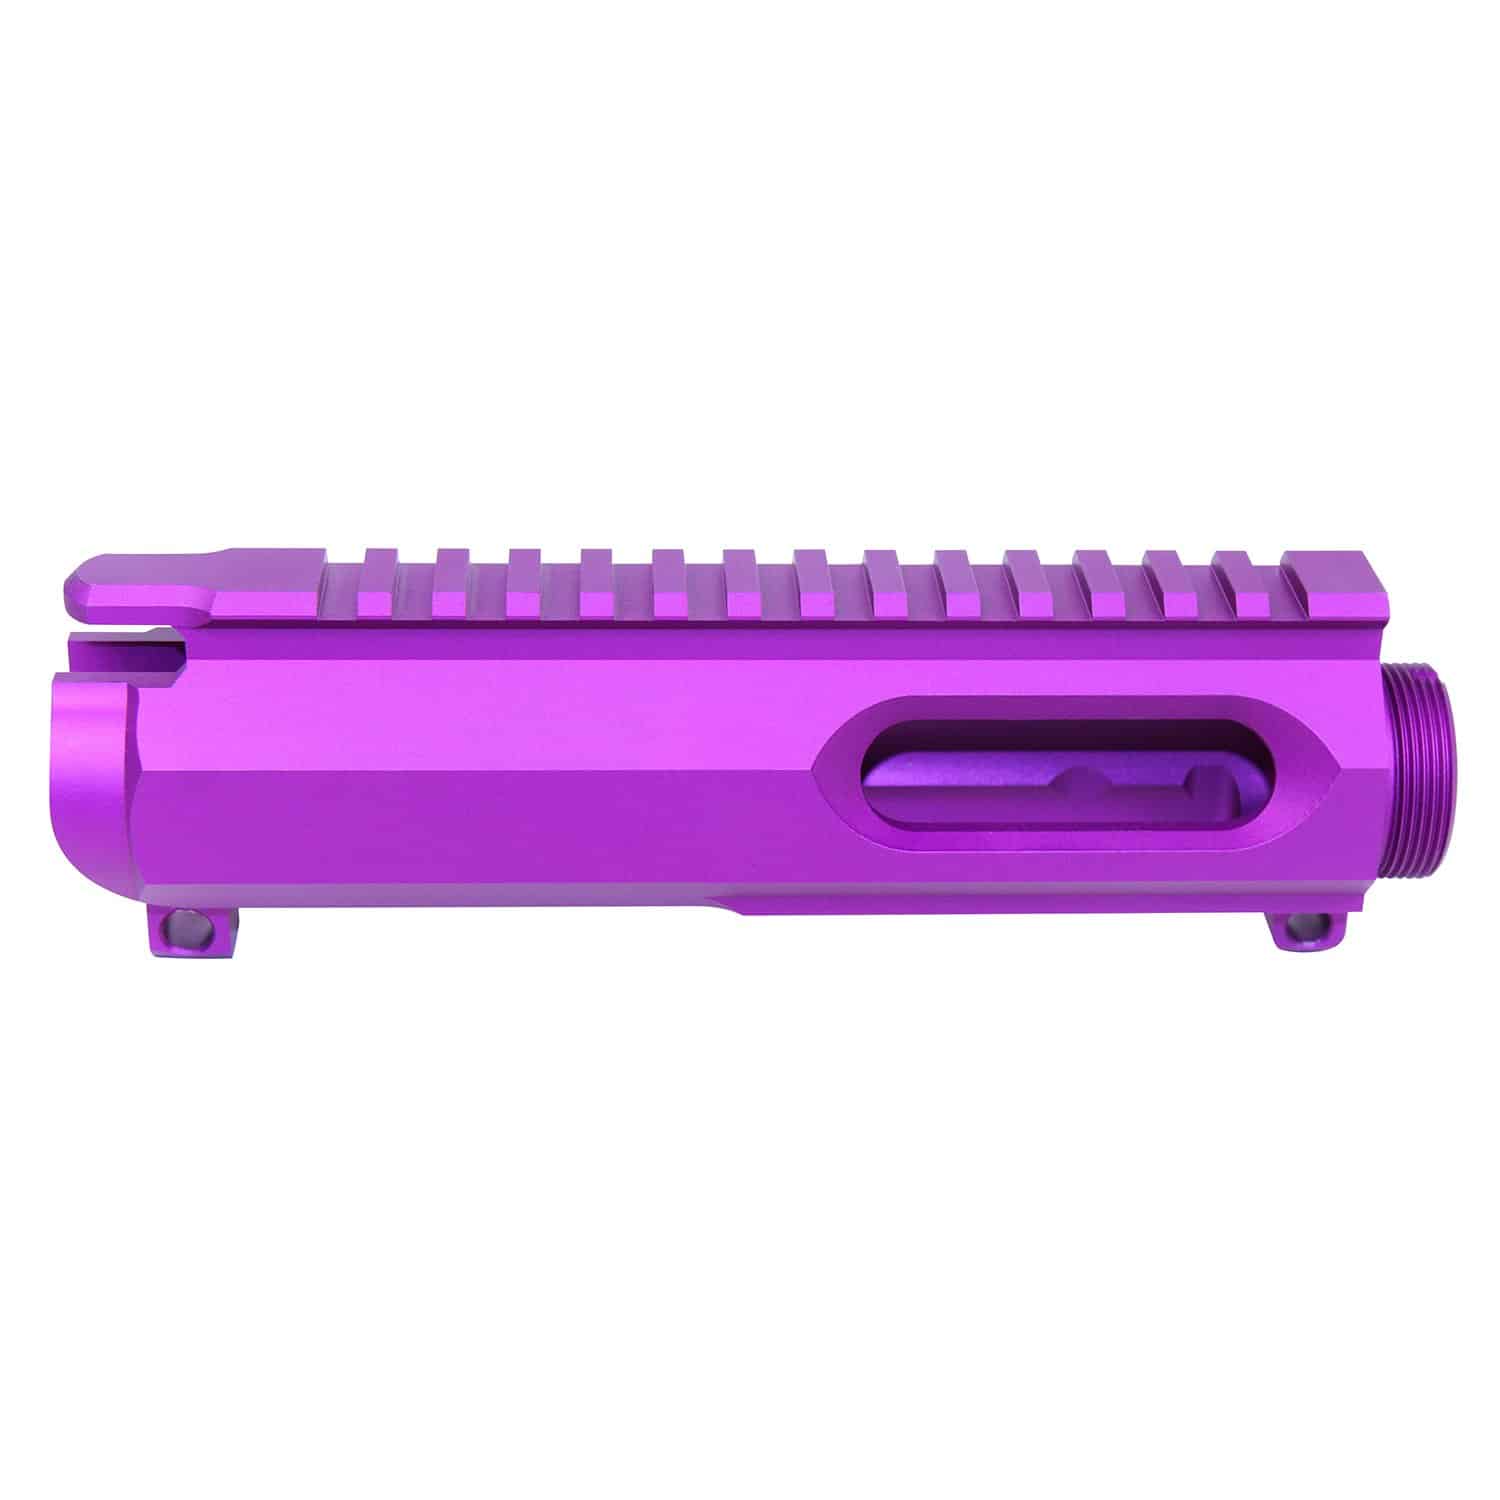 AR-15 9mm stripped upper receiver with a vibrant anodized purple finish.